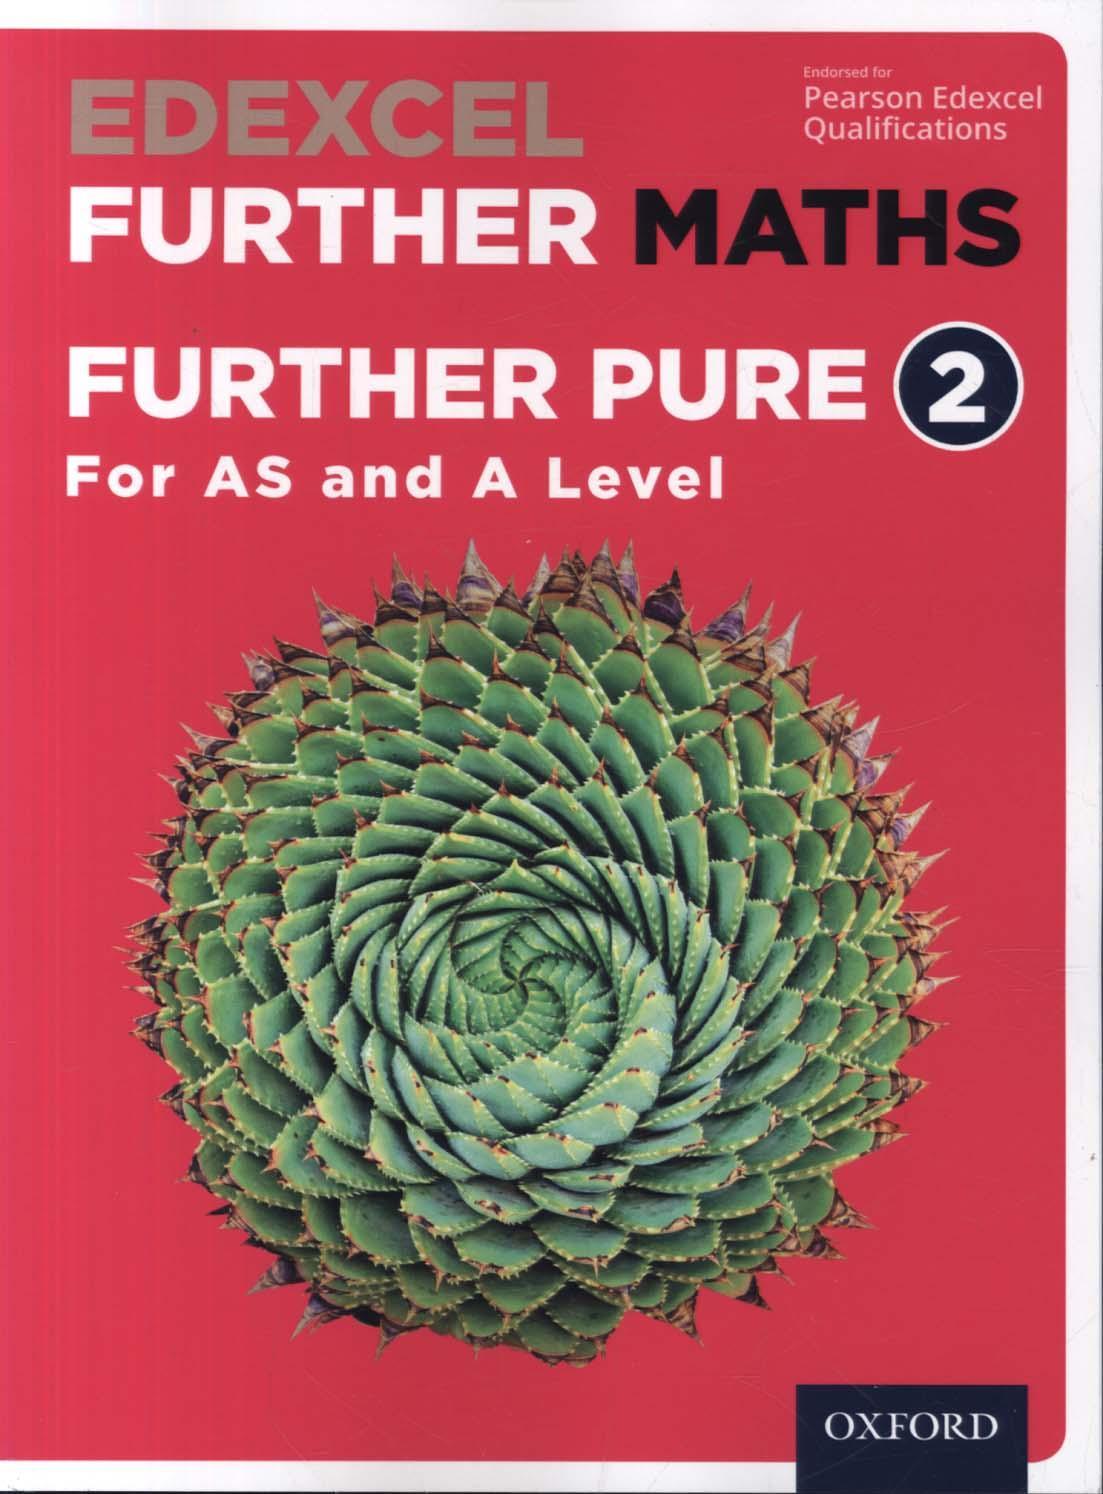 Edexcel Further Maths: Further Pure 2 Student Book (AS and A